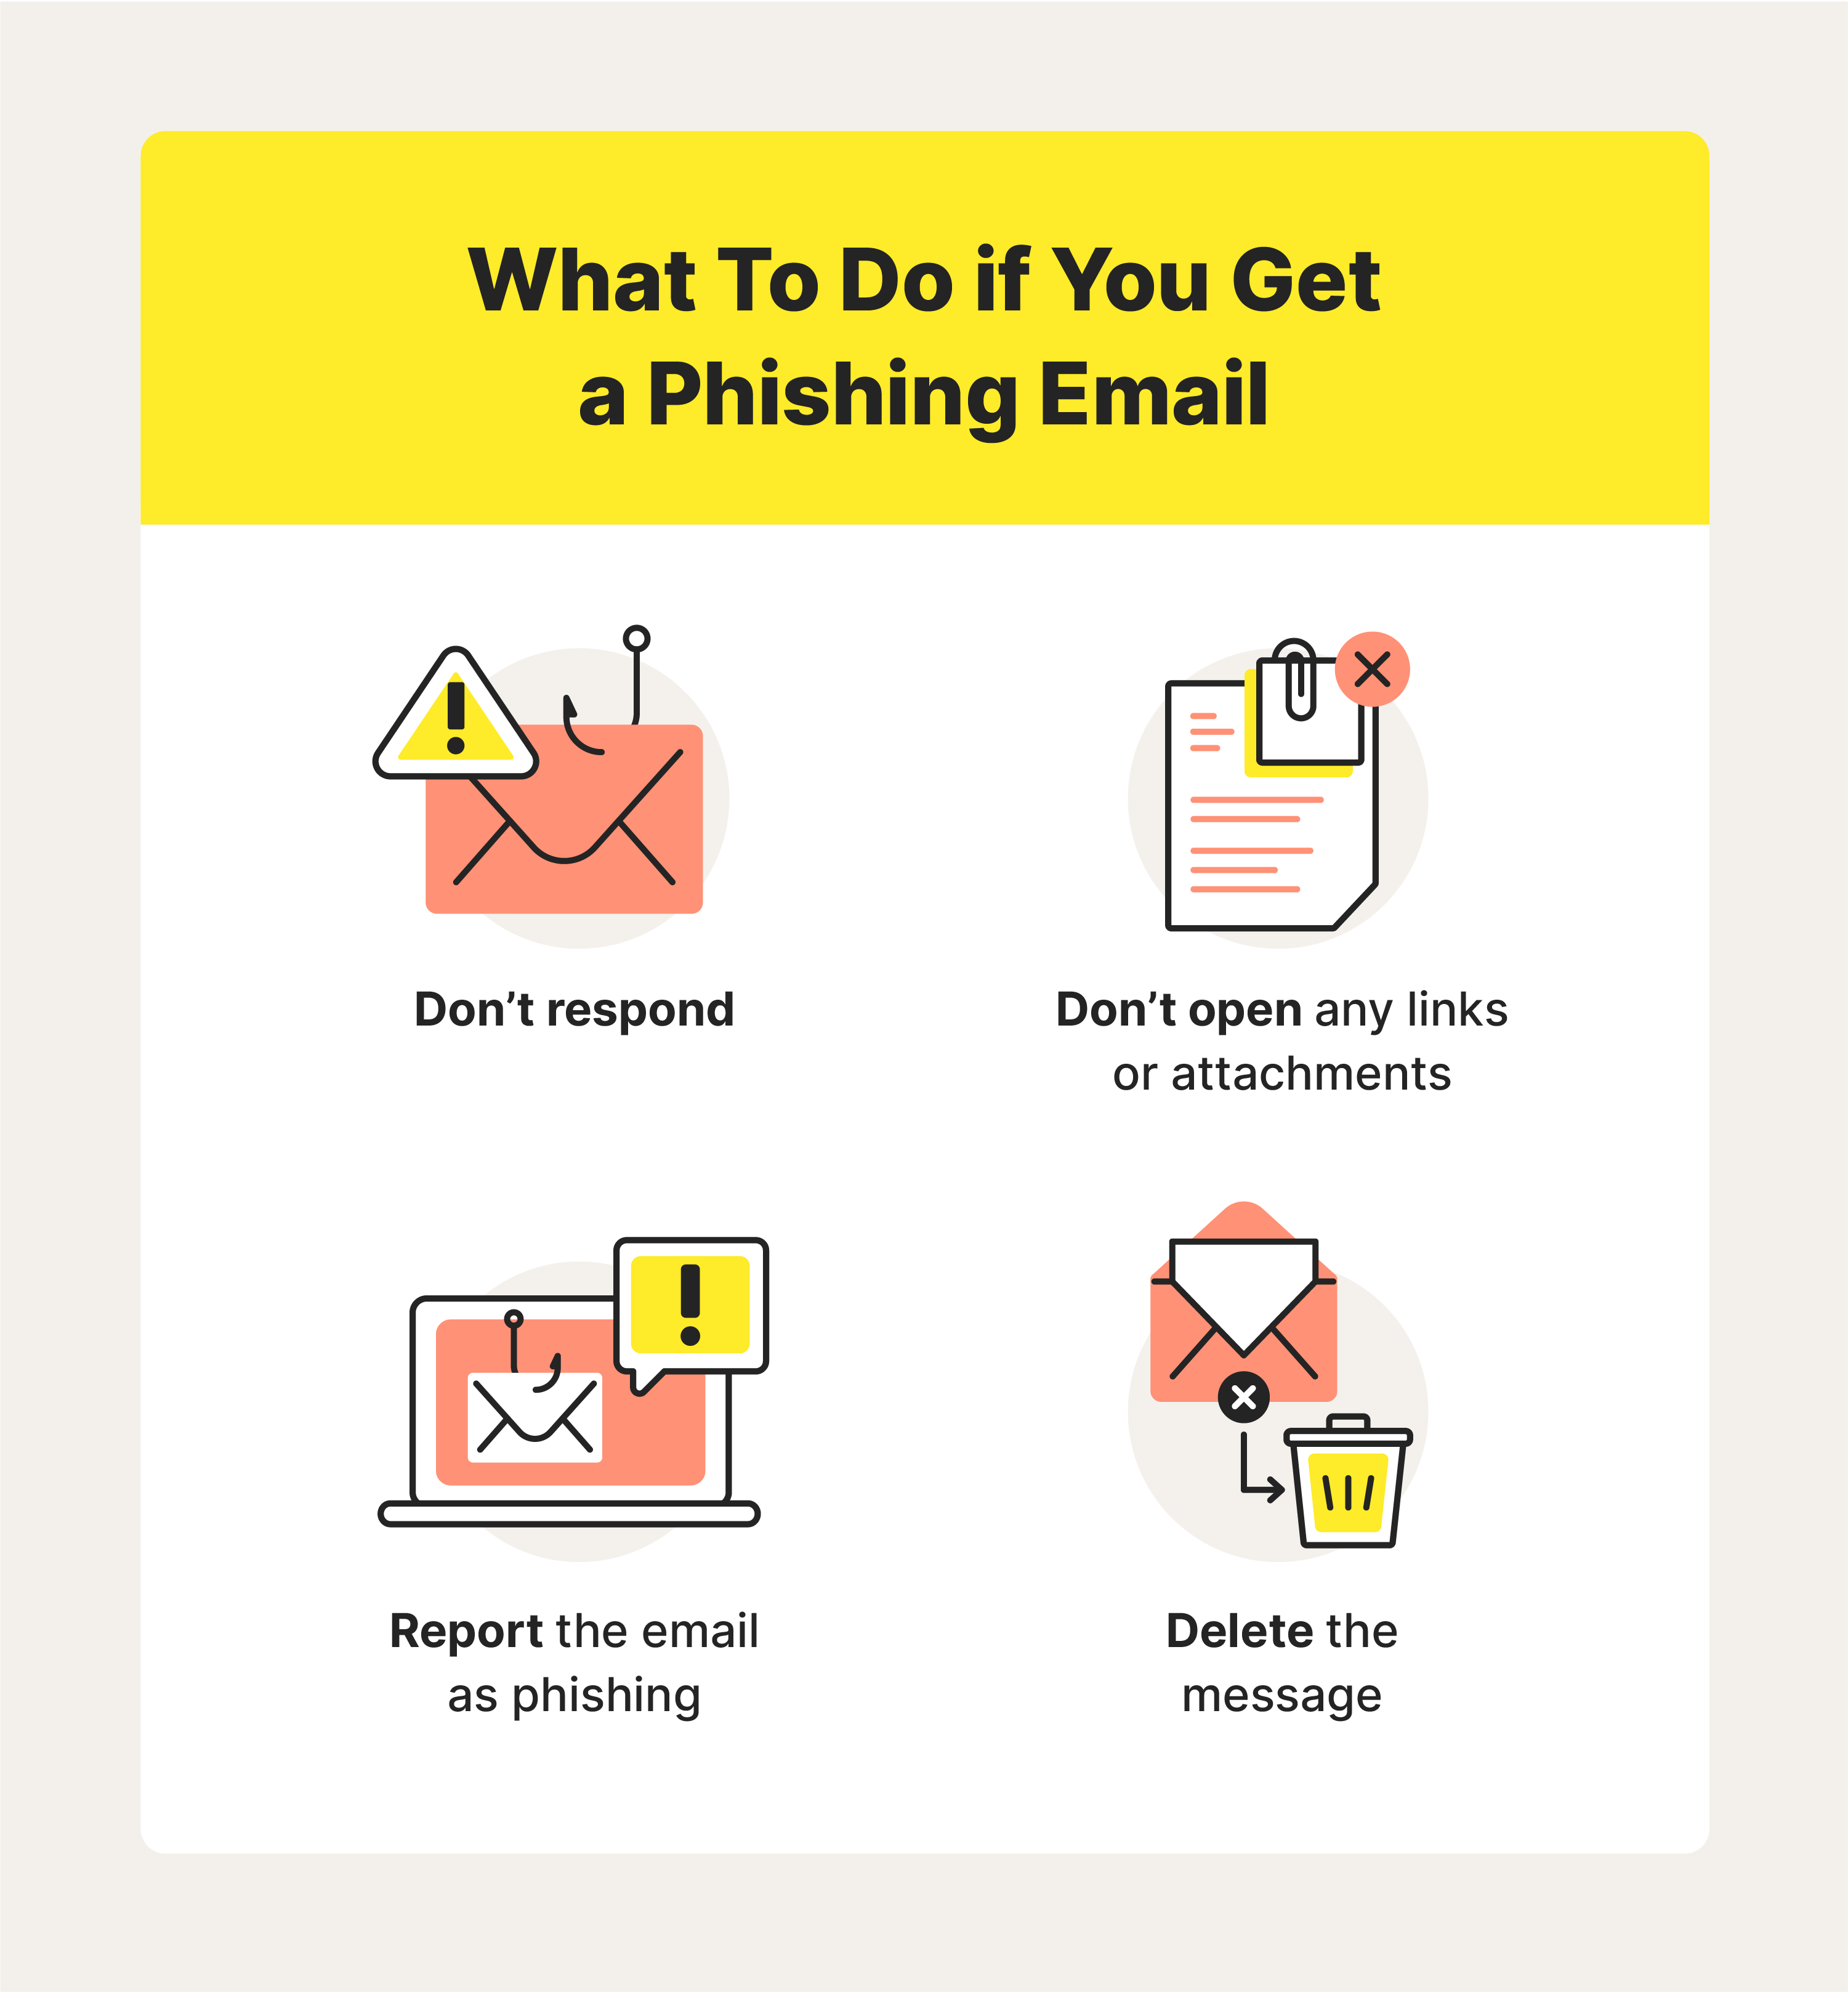 What to do if you get a phishing email